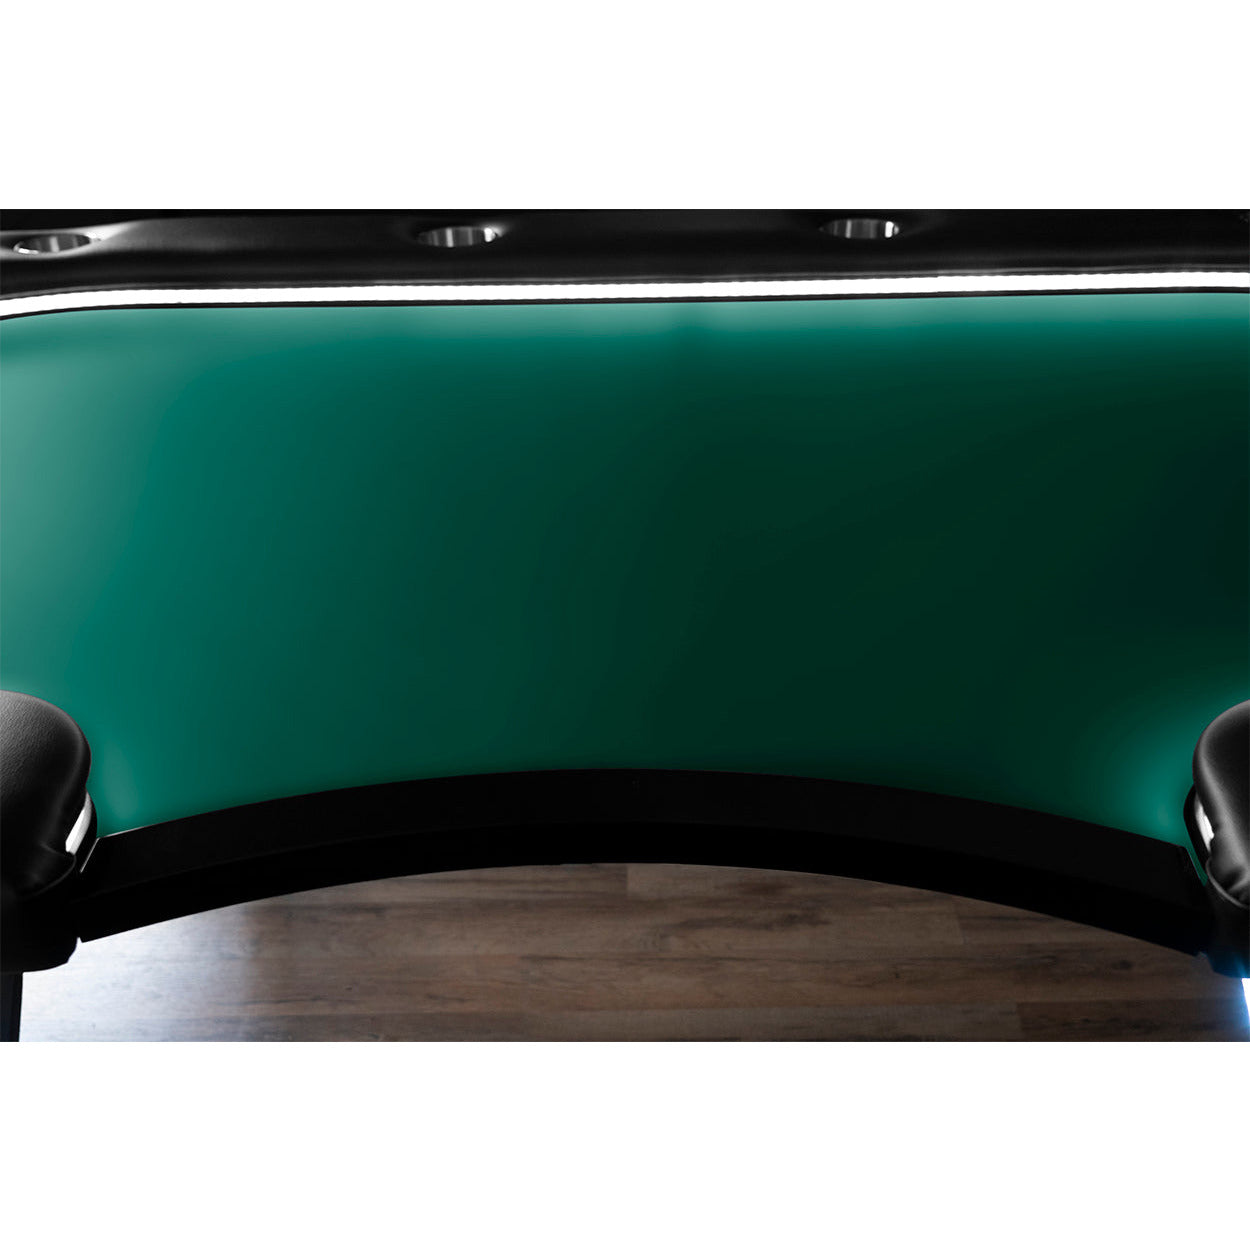 BBO The Aces Pro Alpha Folding Poker Table green close up of back